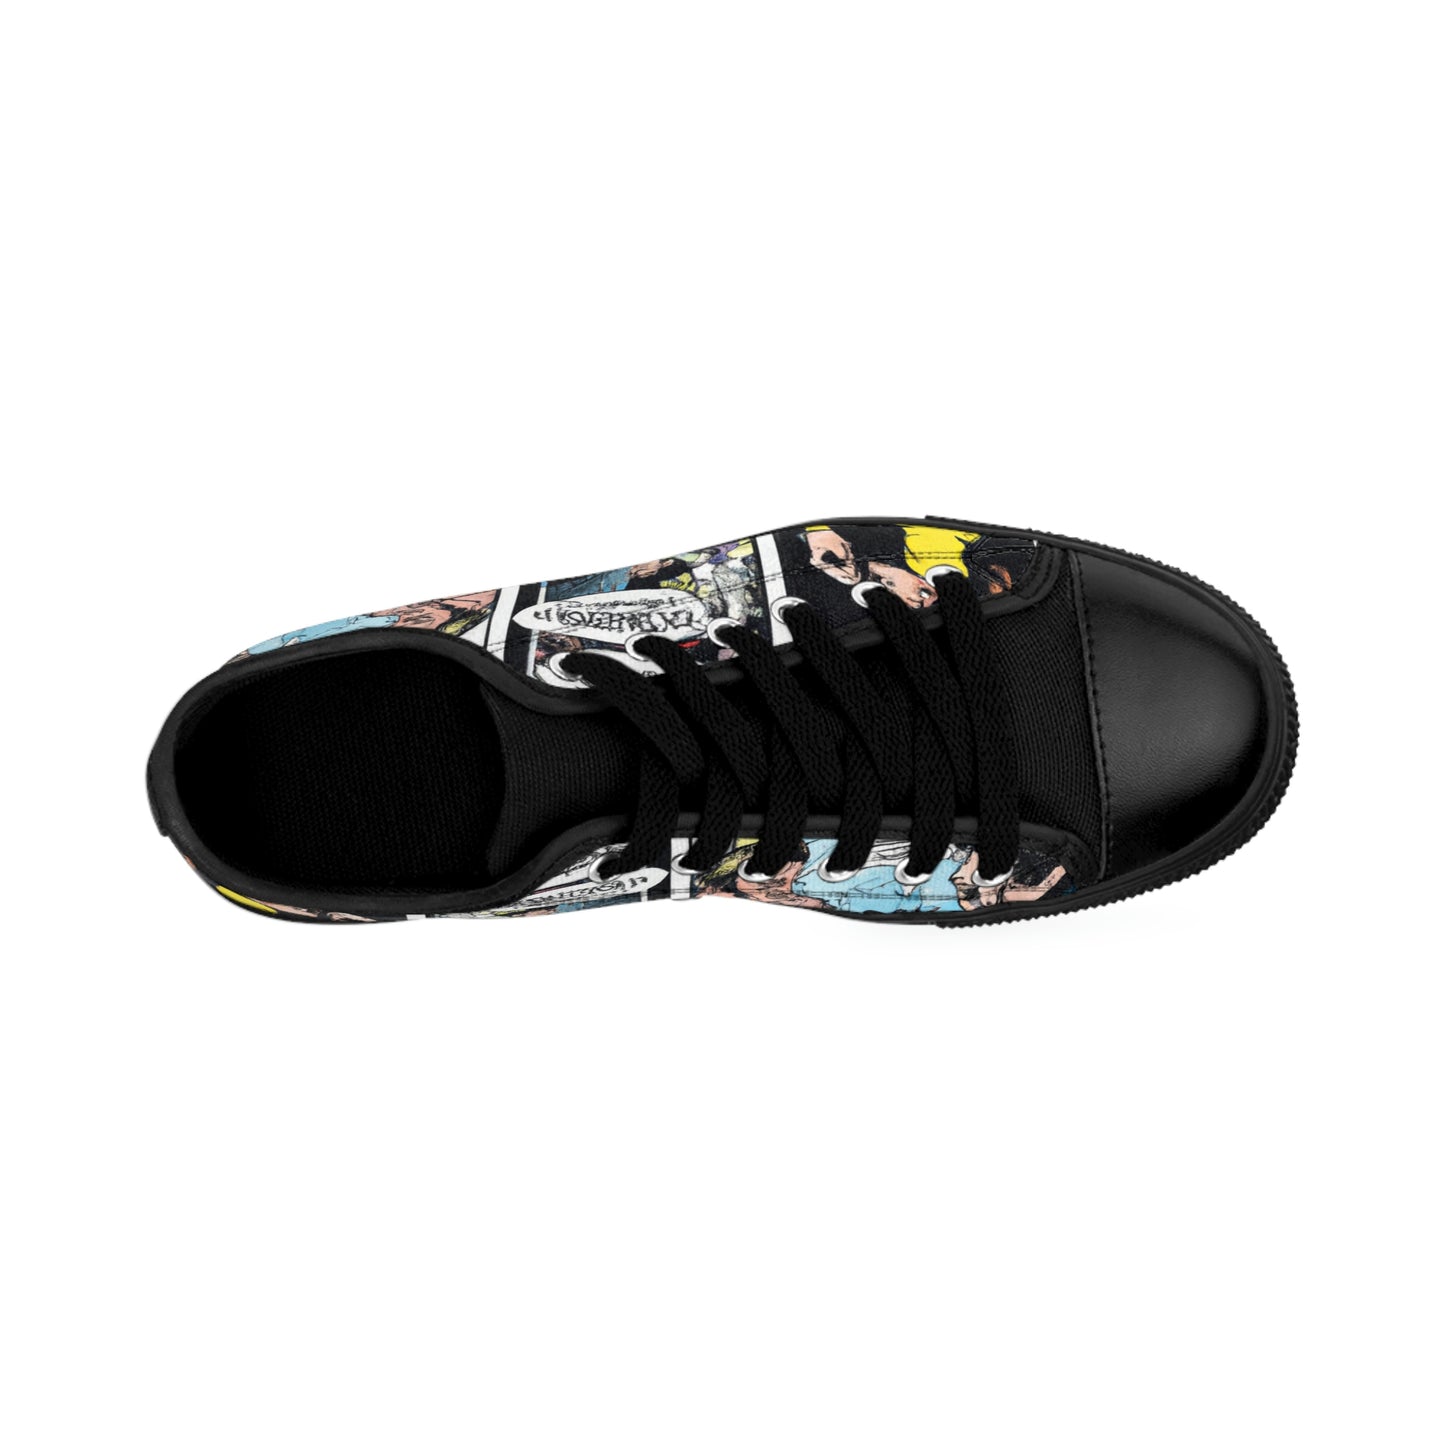 .

Junna d'Shoely - Comic Book Low Top